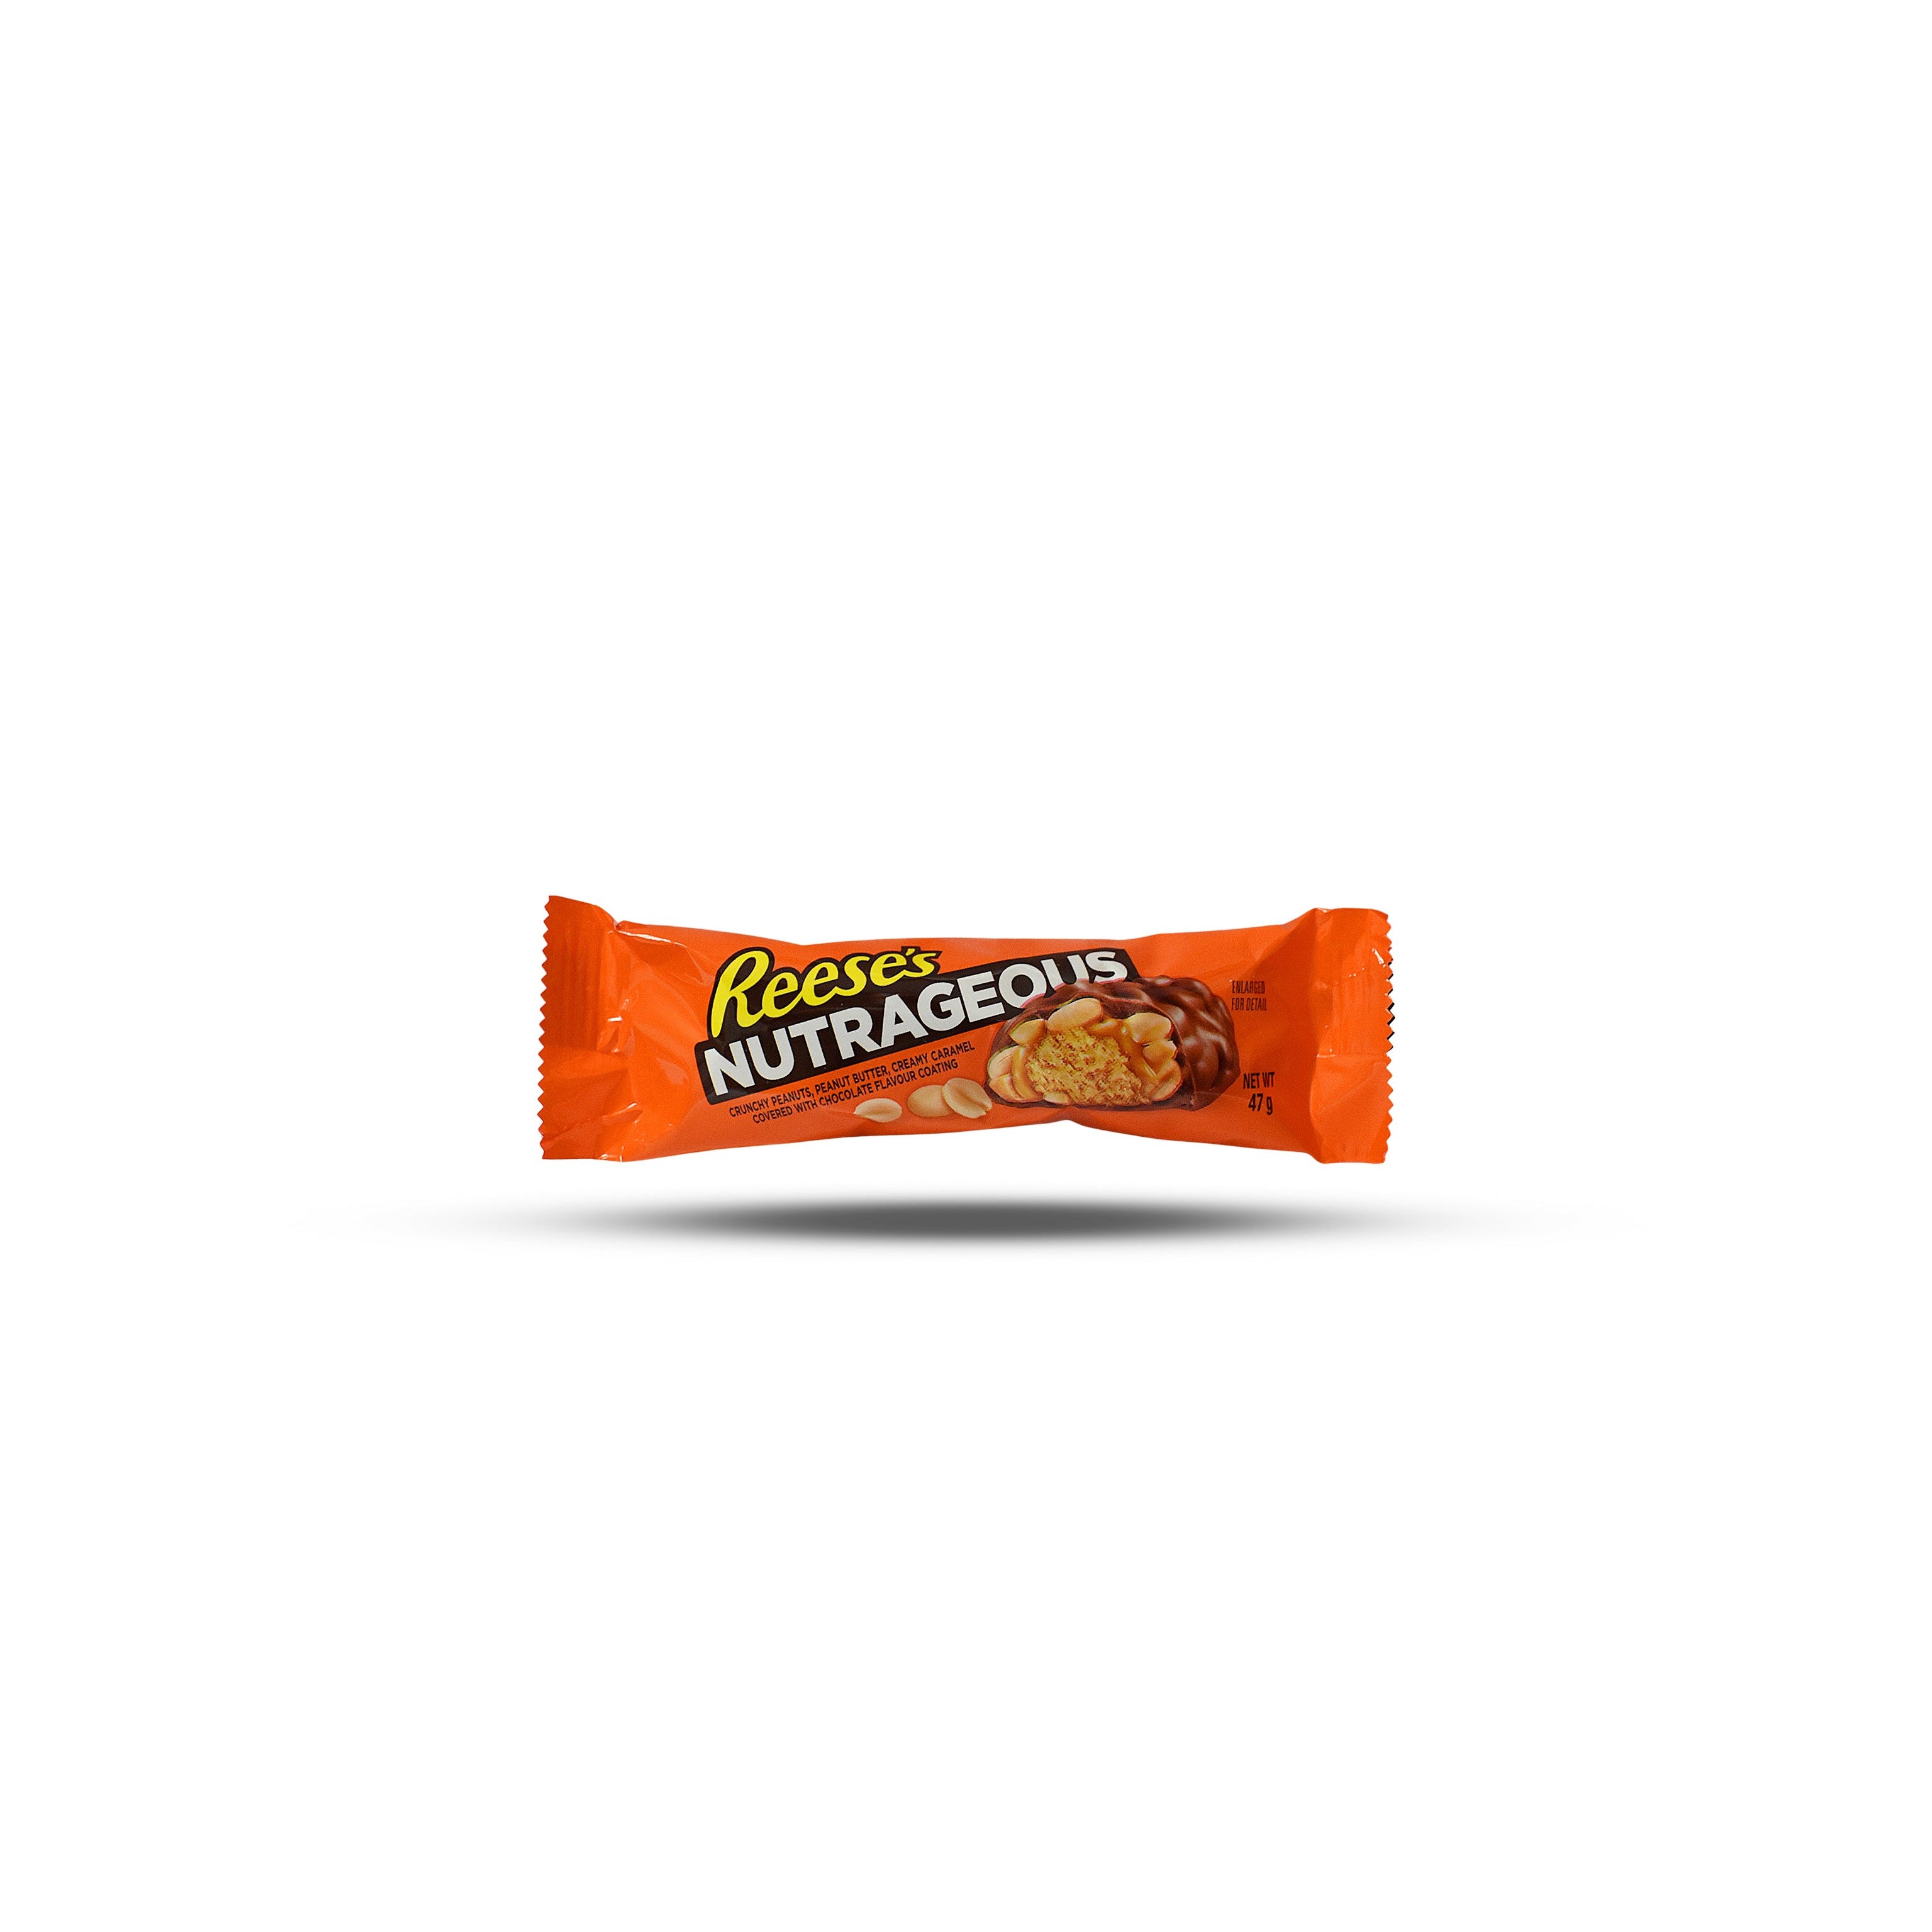 Reese´s - NutRageous 47g-Hershey's-SNACK SHOP AUSTRIA